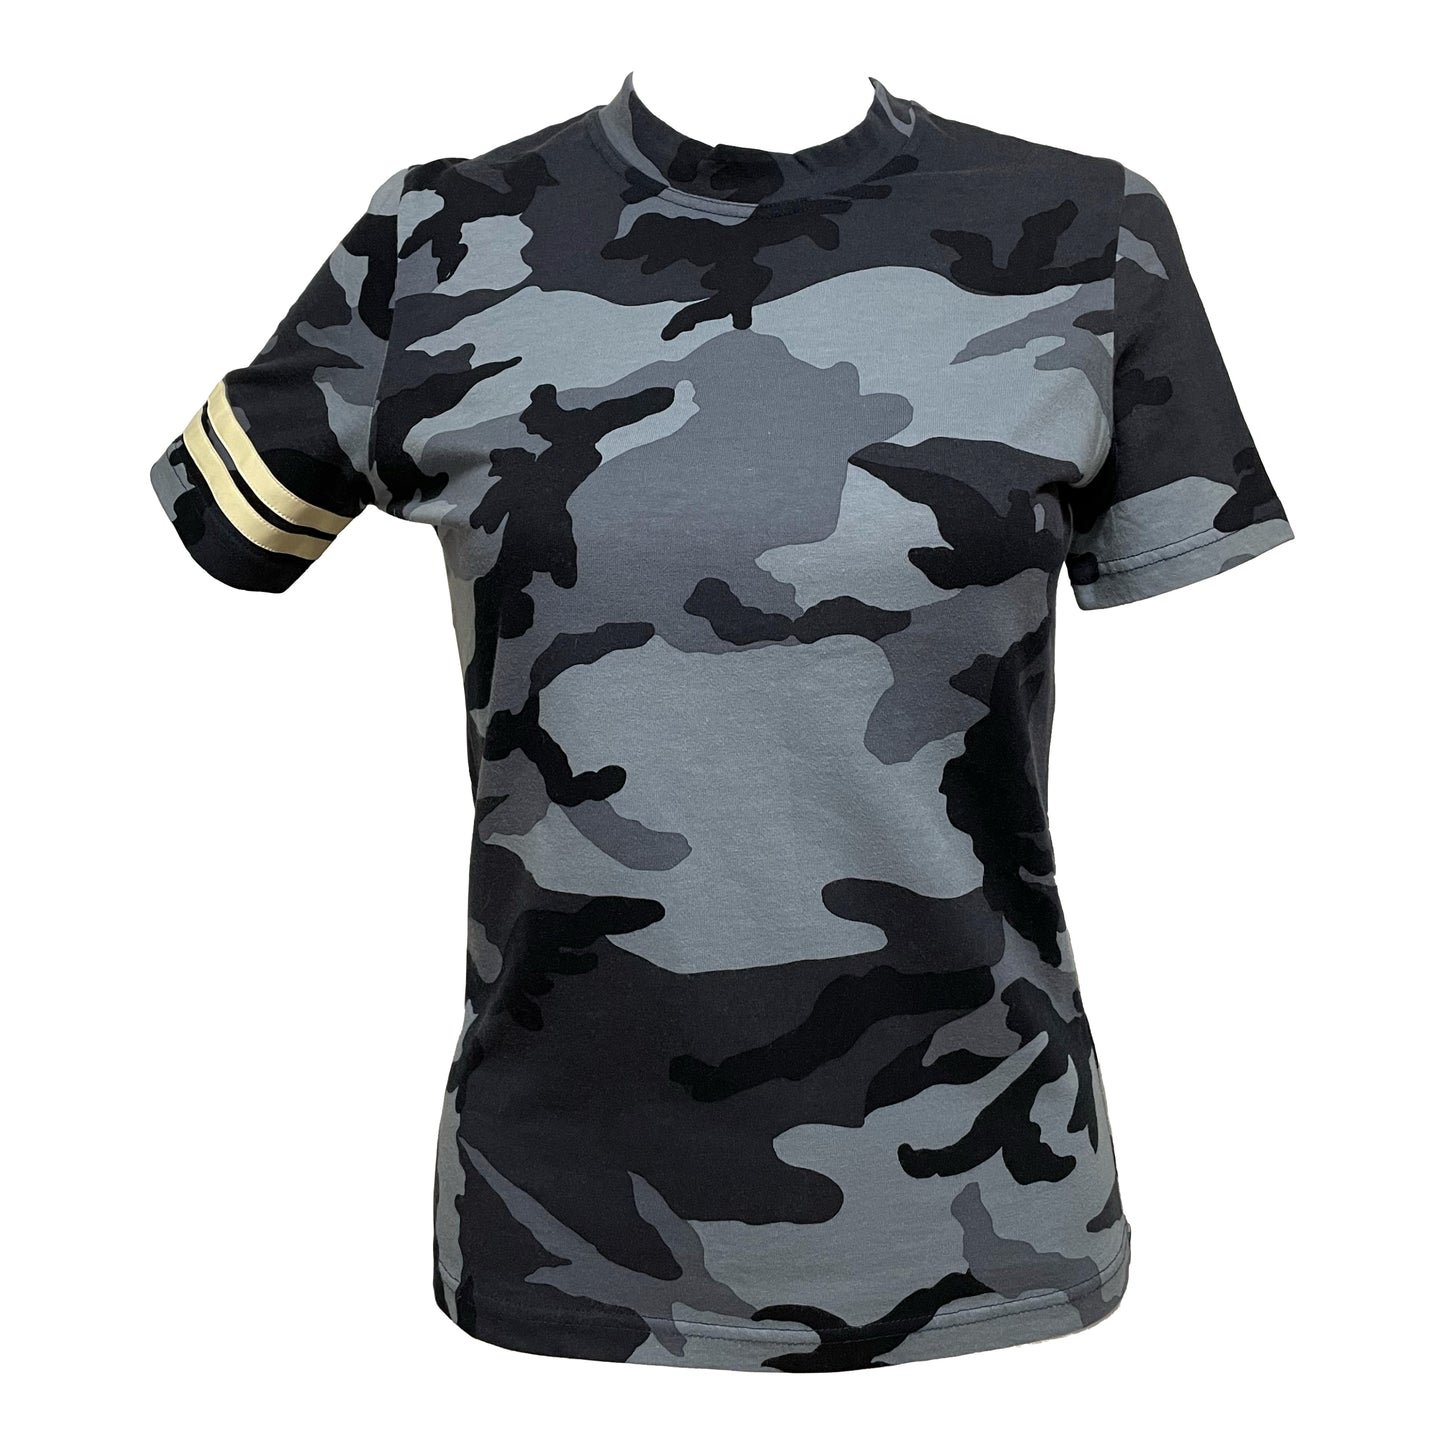 CHRISTIAN DIOR Spring Summer 2002 Camouflage T-Shirt